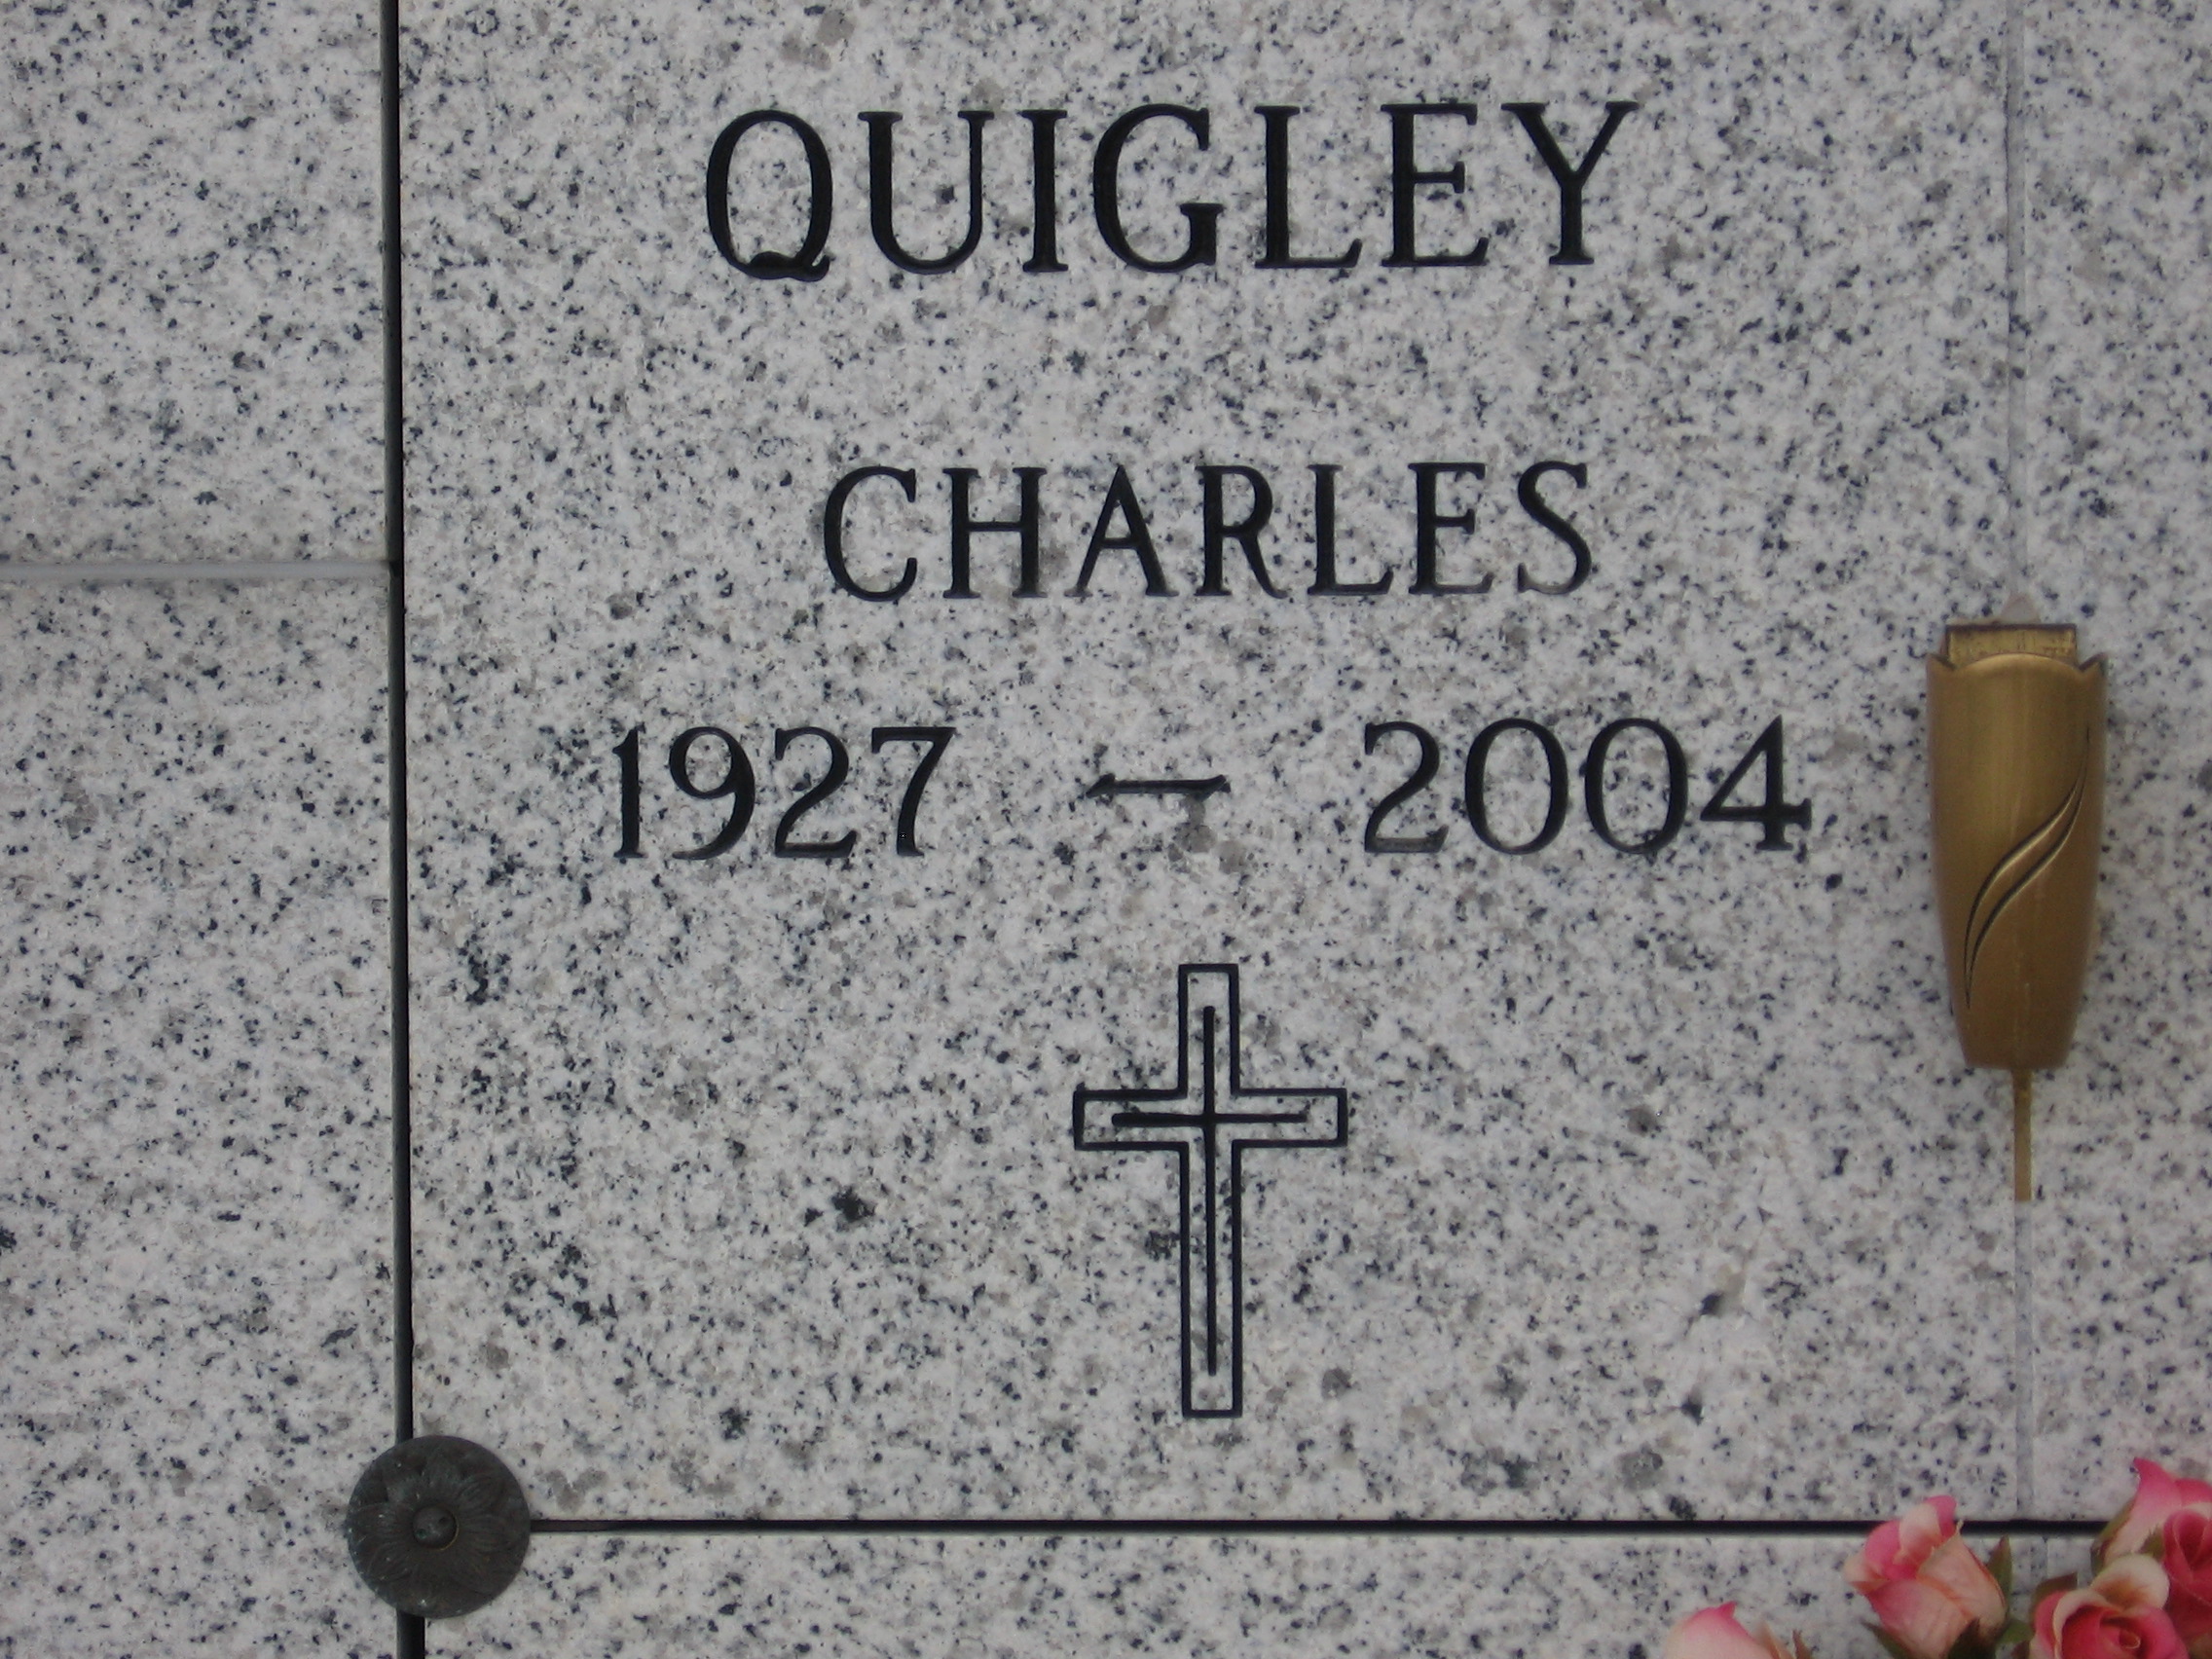 Charles Quigley